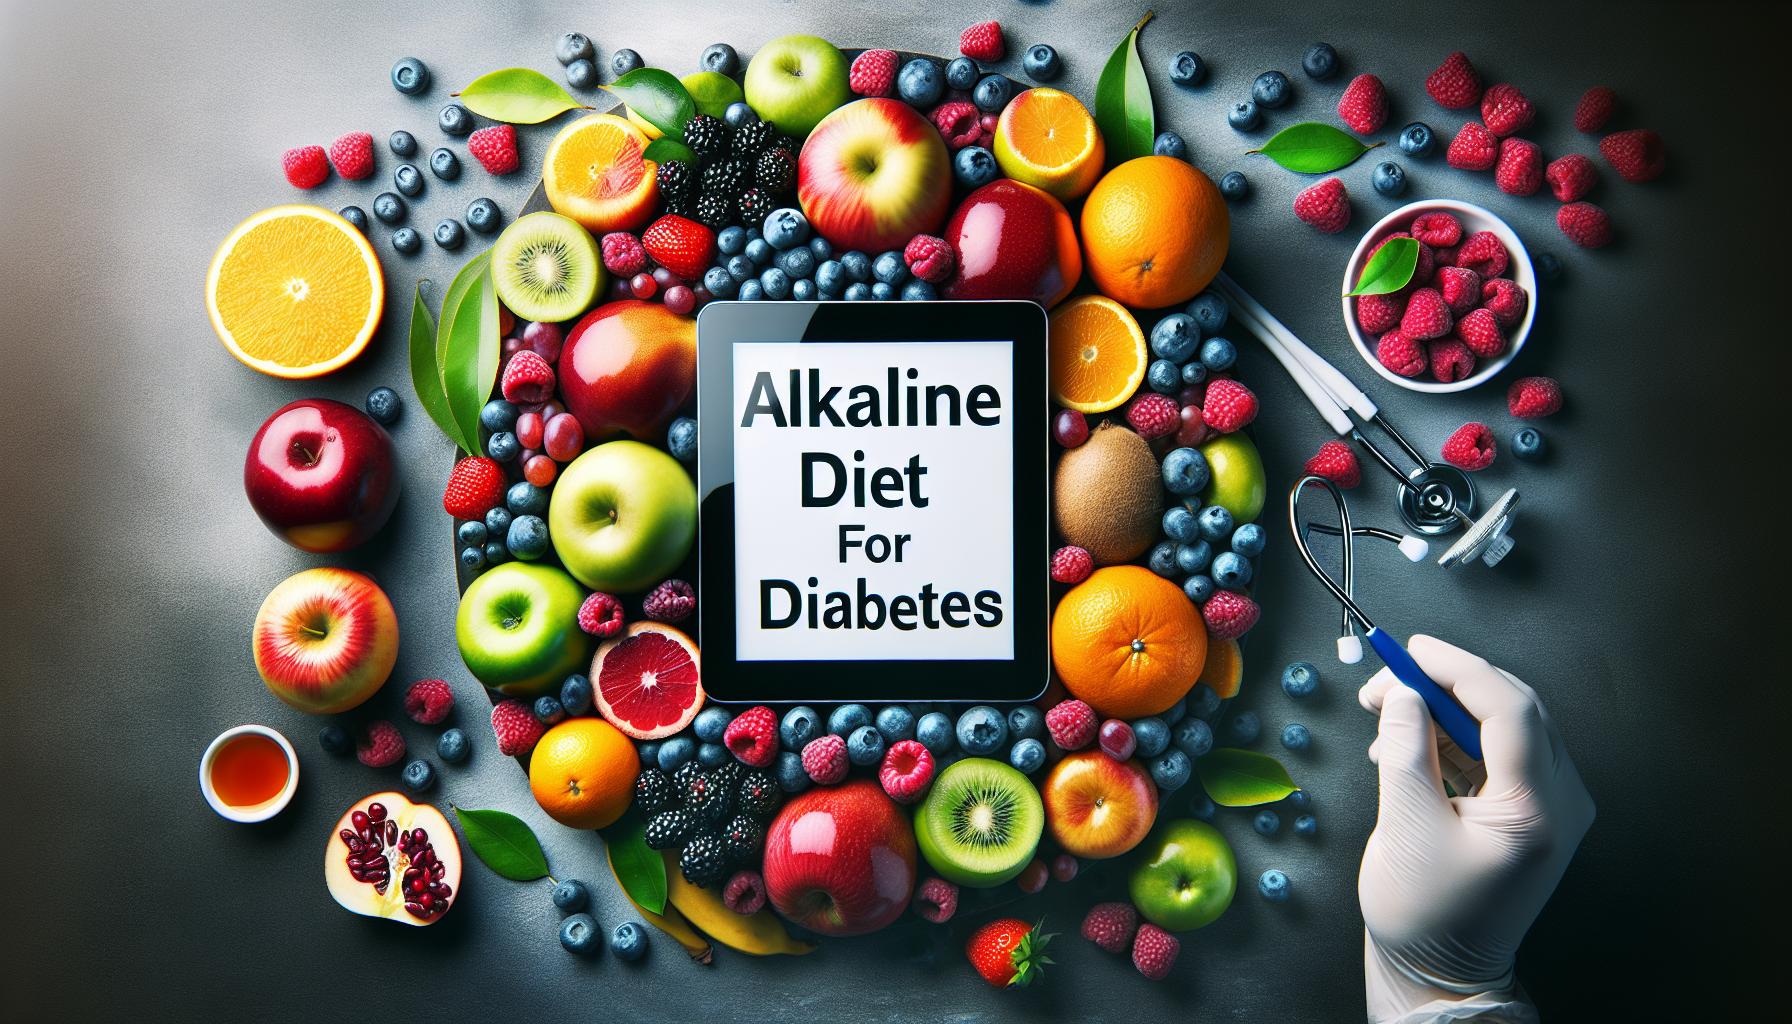 What Is A Alkaline Diet For Diabetes